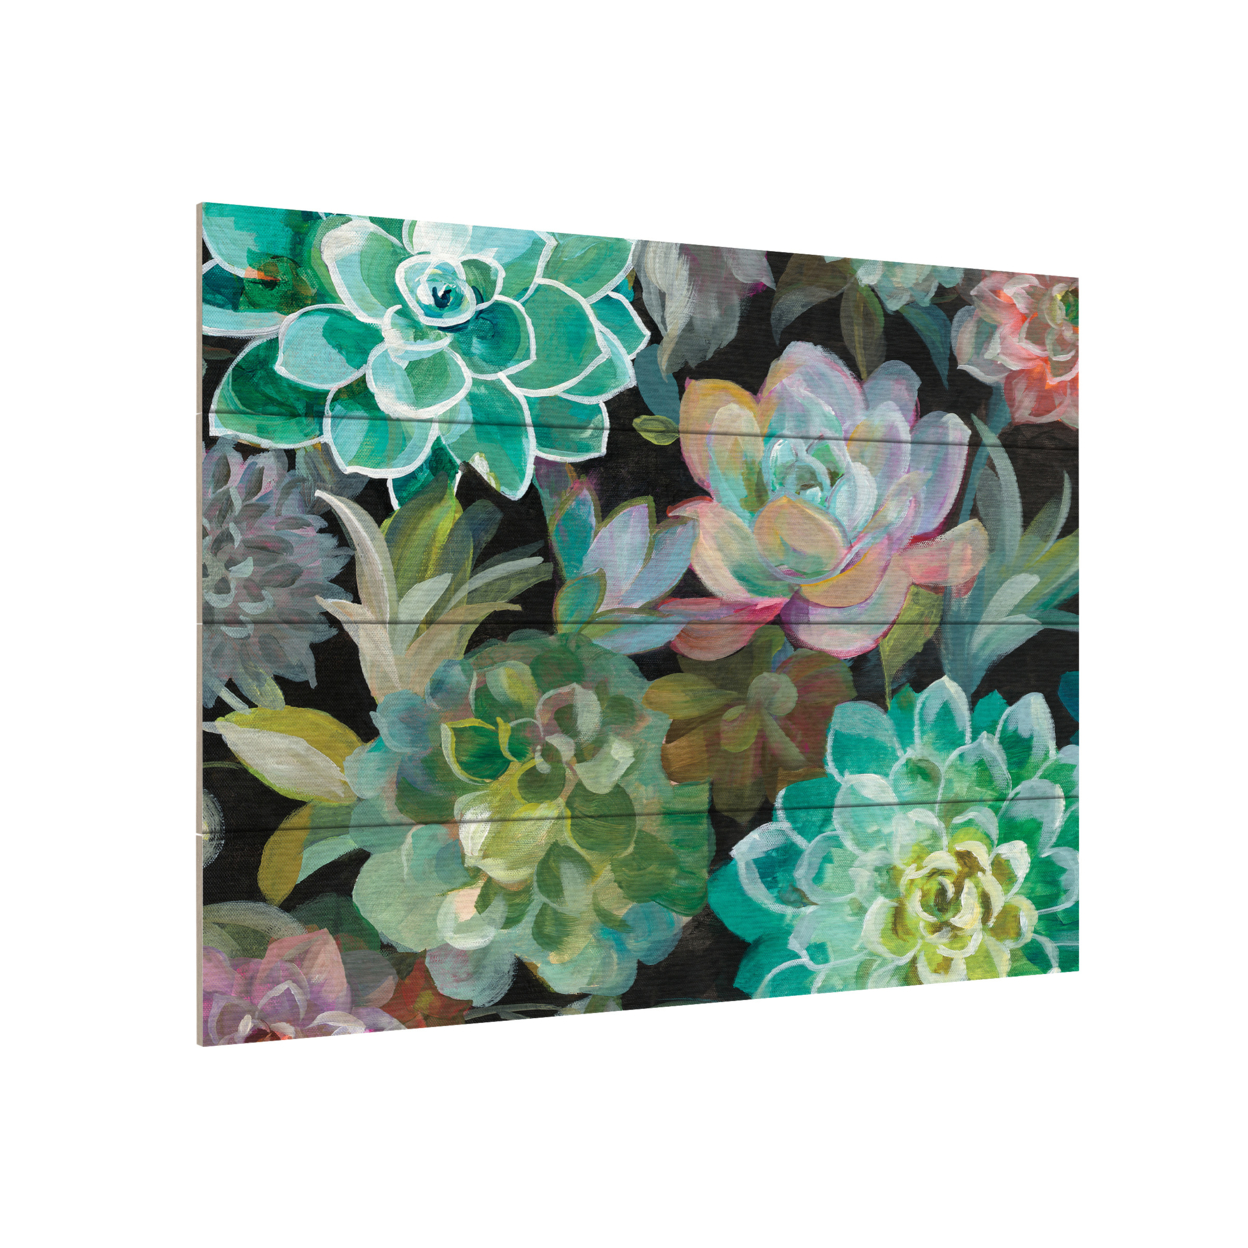 Wall Art 12 X 16 Inches Titled Floral Succulents V2 Crop Ready To Hang Printed On Wooden Planks